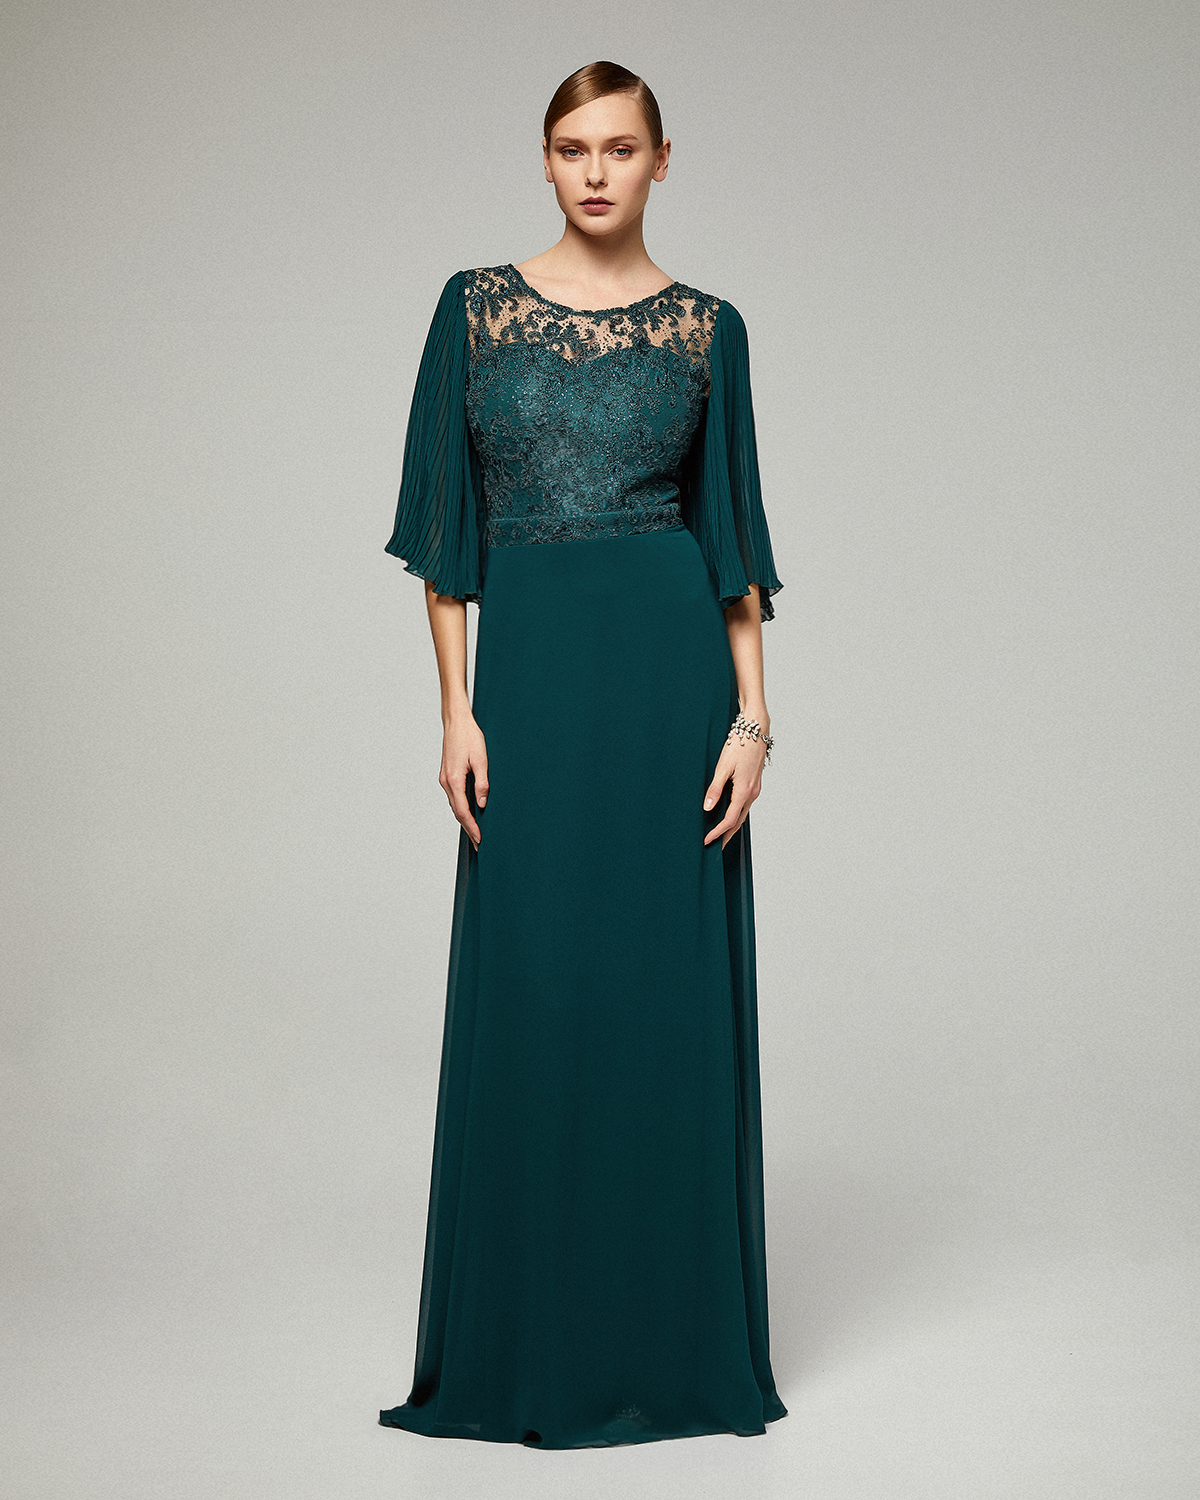 Classic Dresses / Long evening chiffon dress with lace top and pleated sleeves